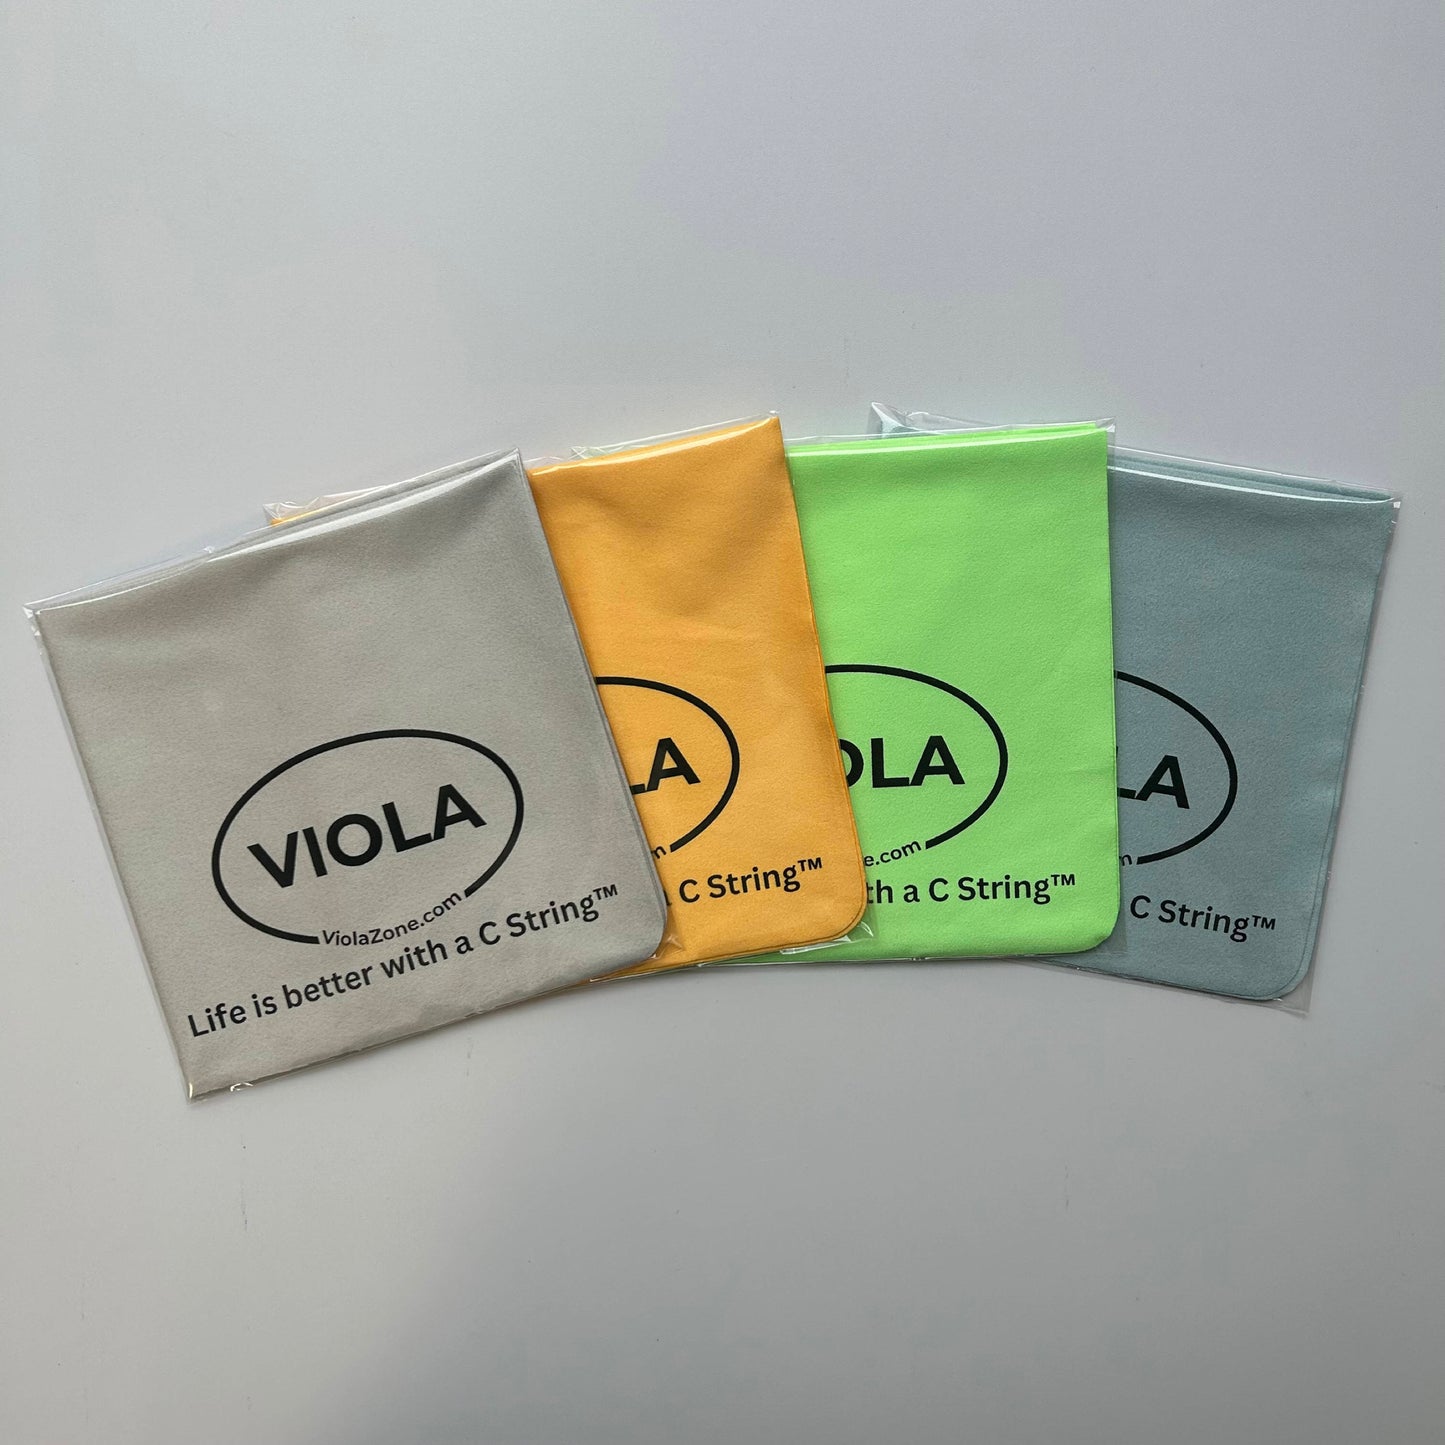 MicroFiber Viola Polishing and Cleaning Cloth - Life is Better with a C String™